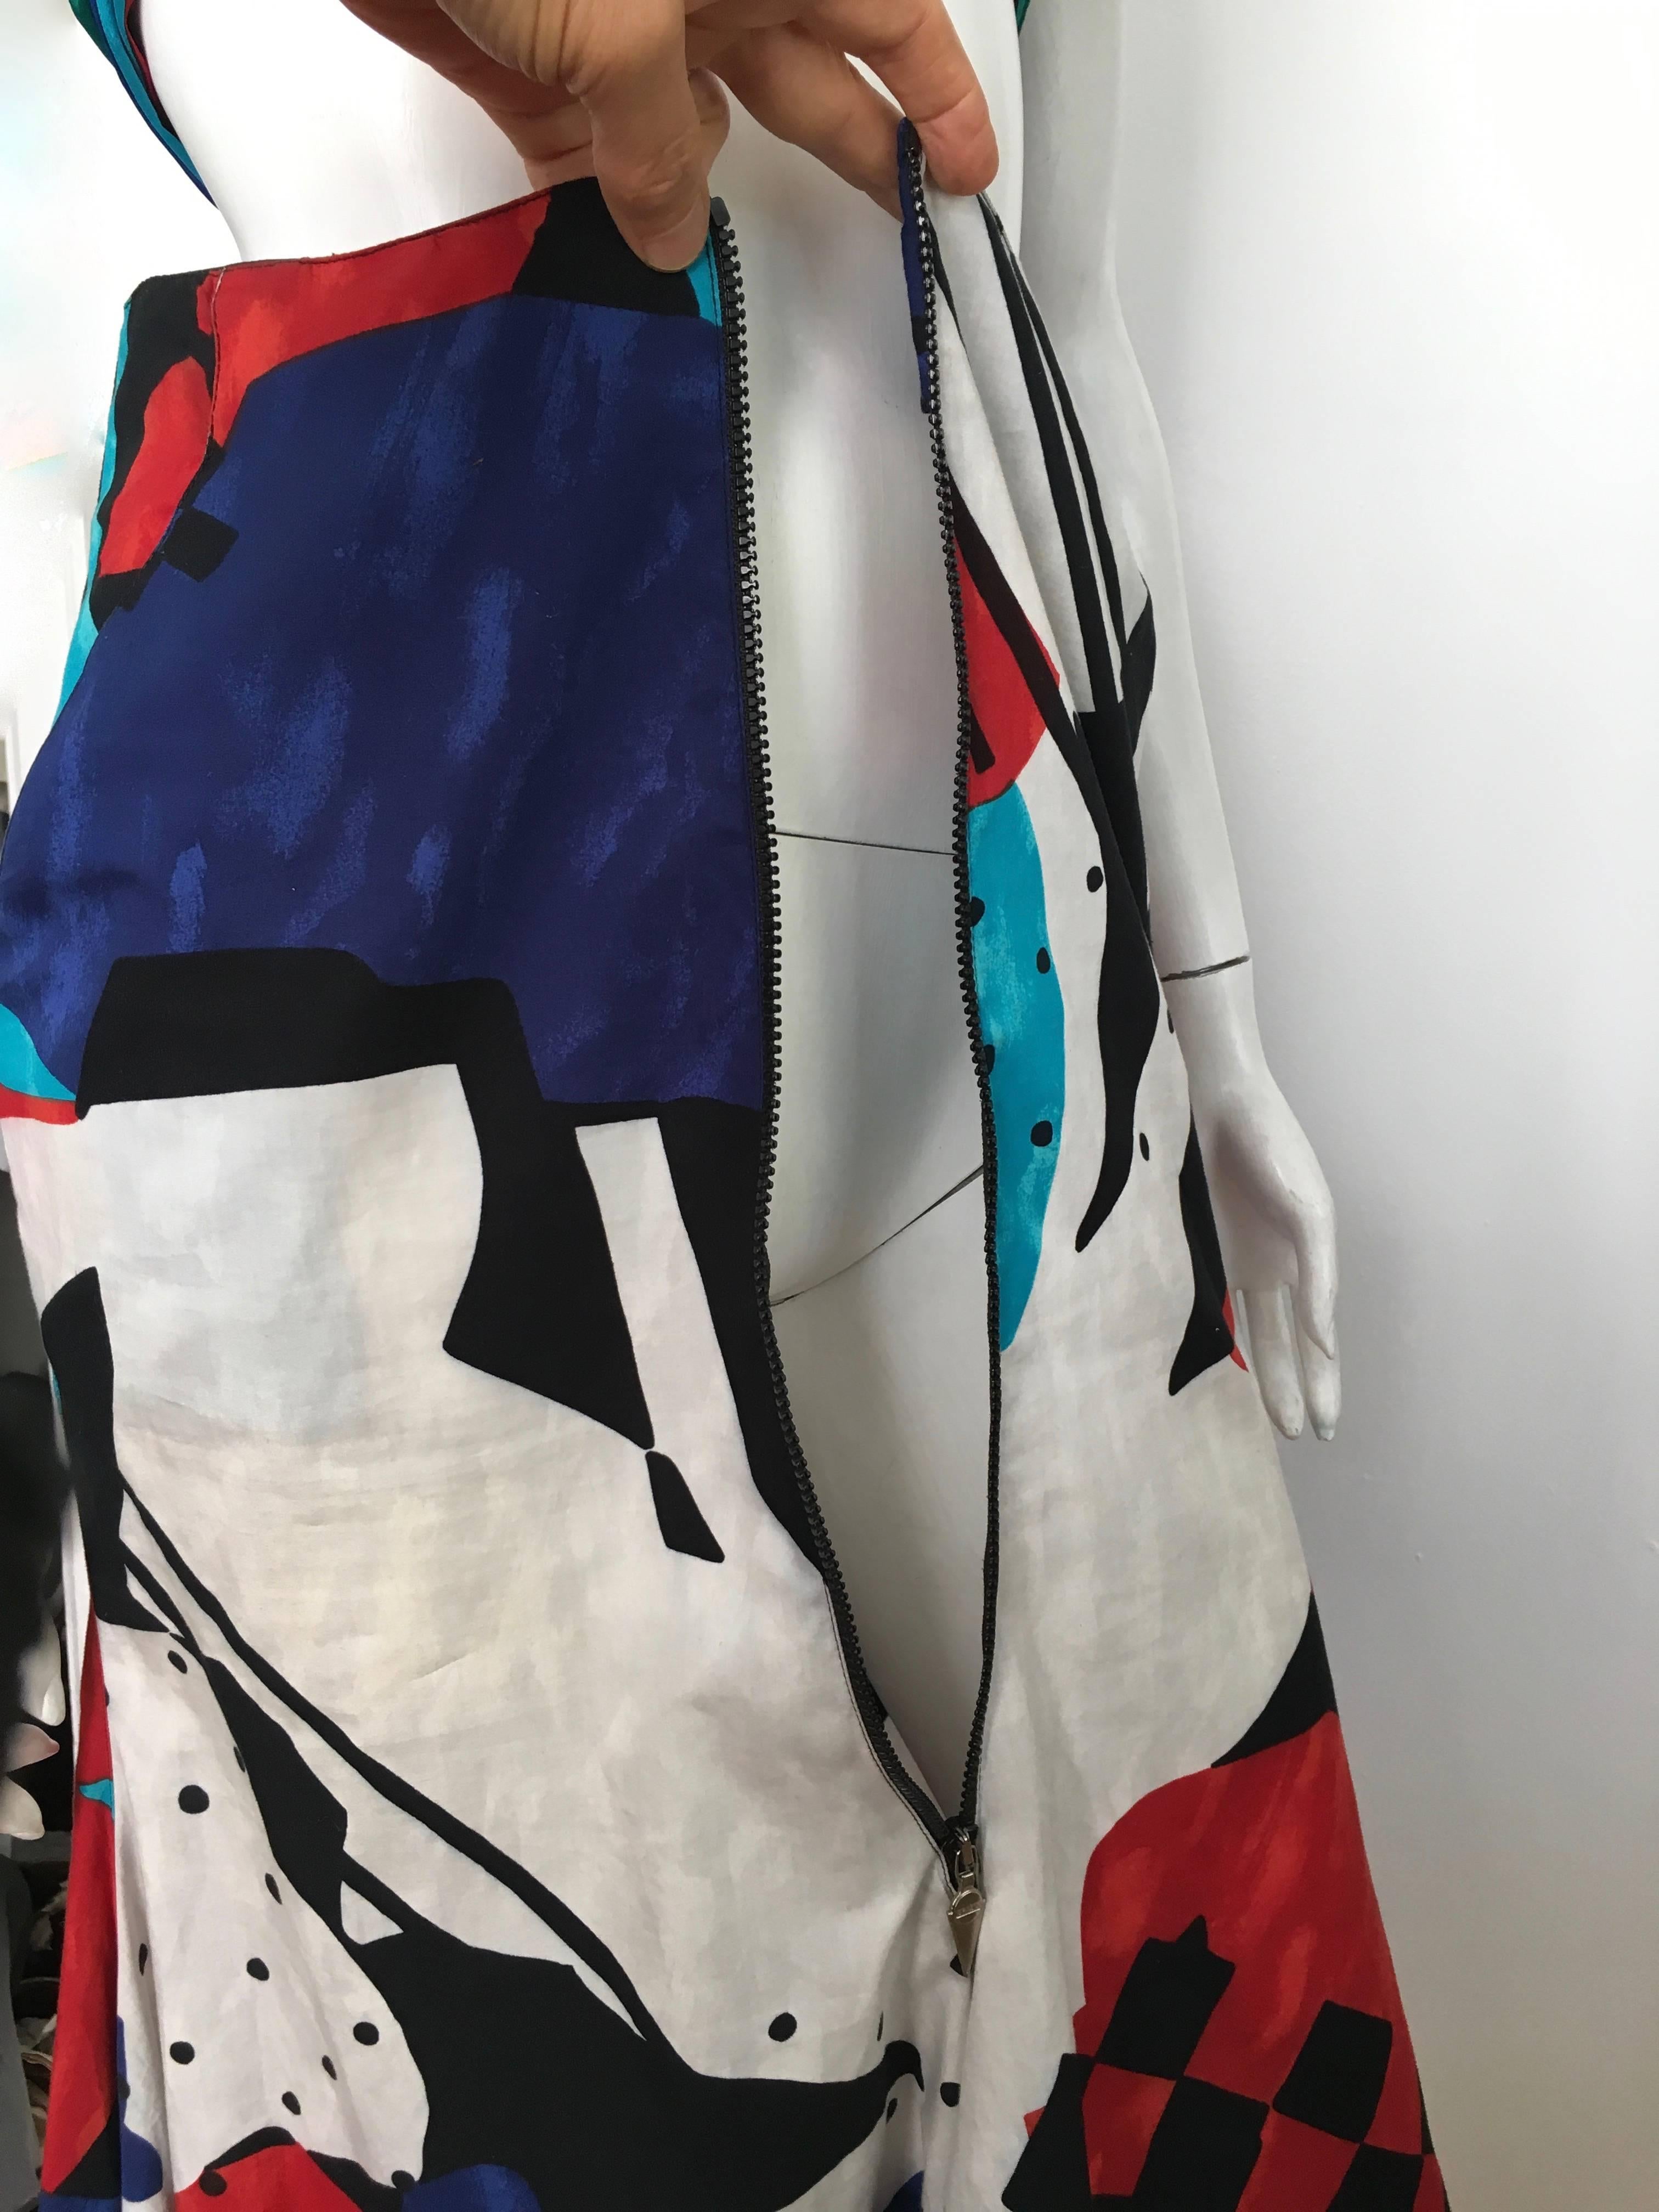 Women's or Men's Spazio 1980s Cotton Abstract Pattern Mermaid Skirt with Pockets Size 4. For Sale